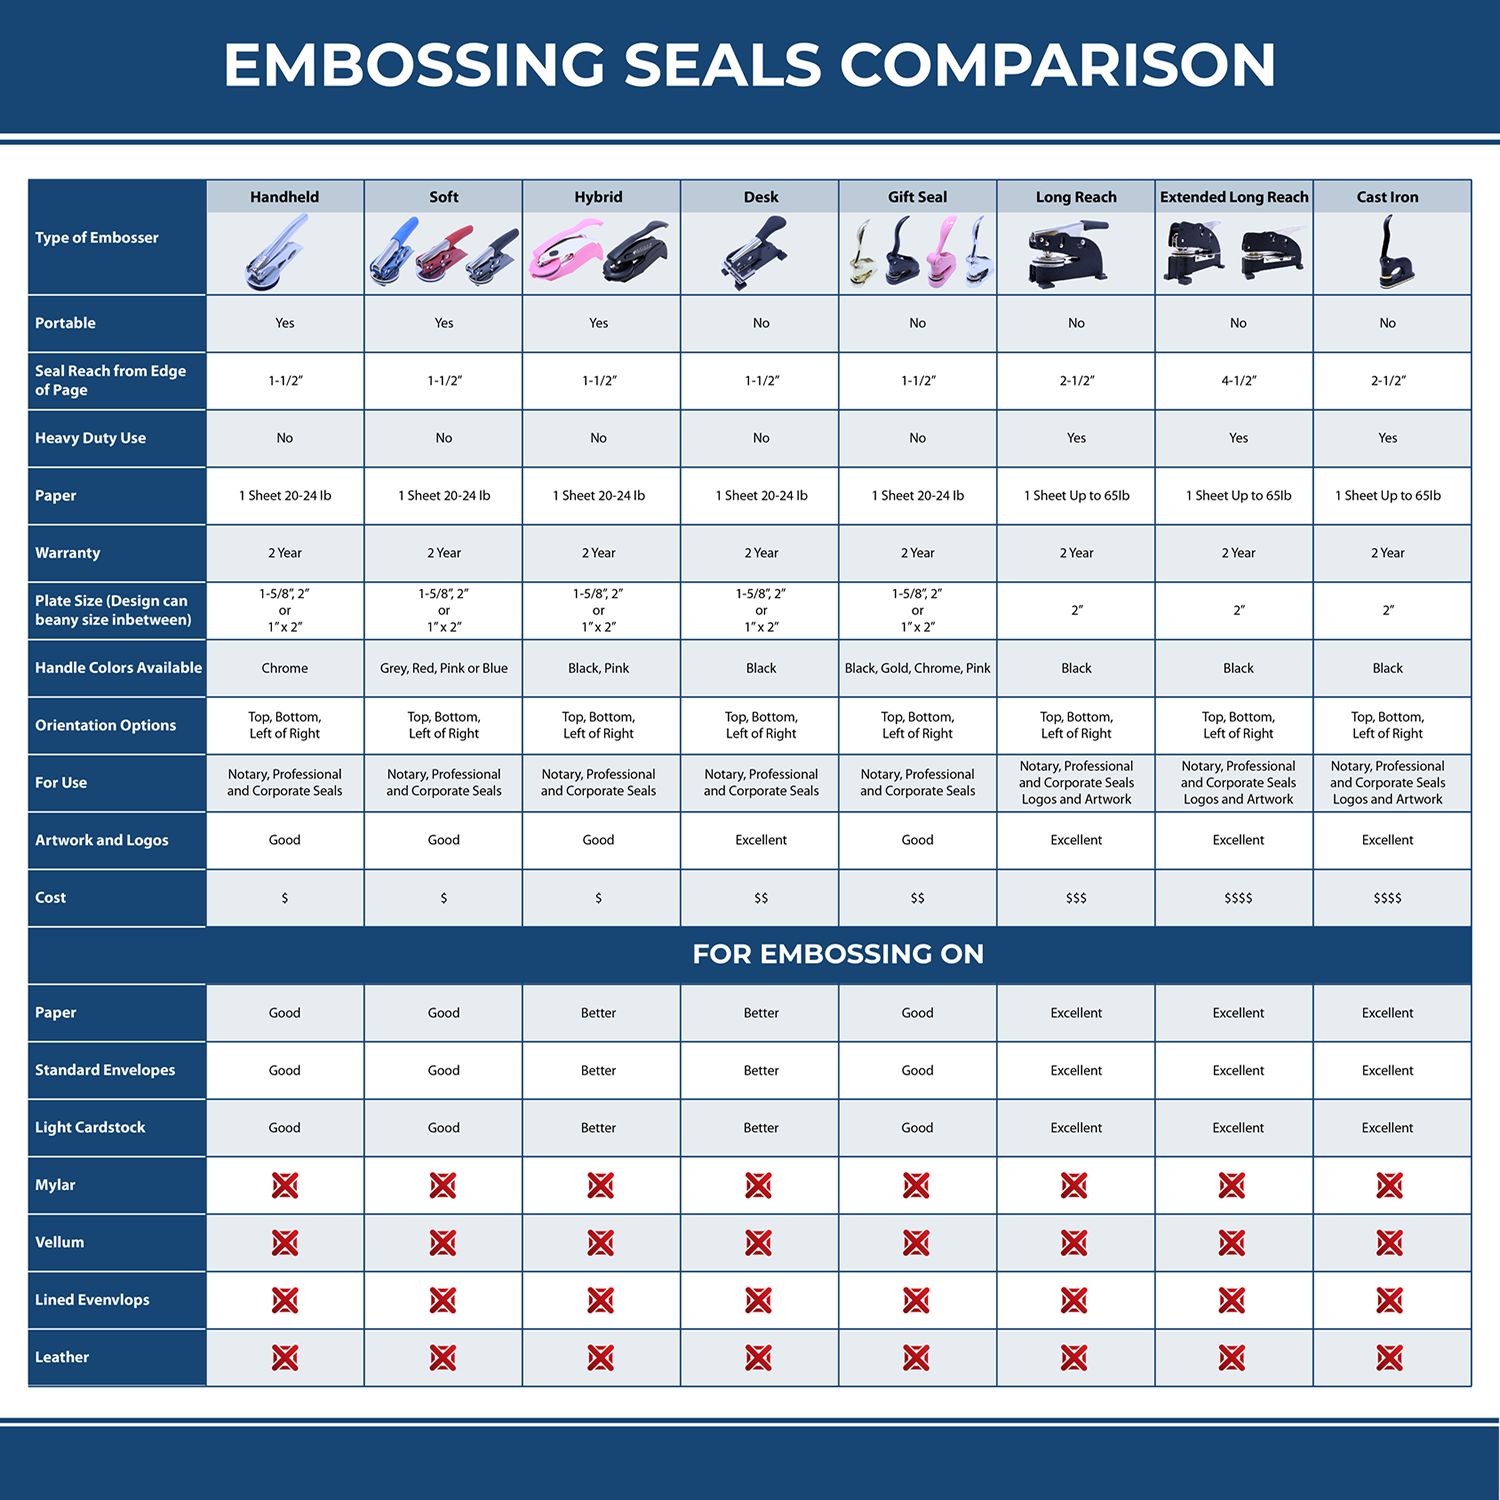 A comparison chart for the different types of mount models available for the New Mexico Desk Surveyor Seal Embosser.